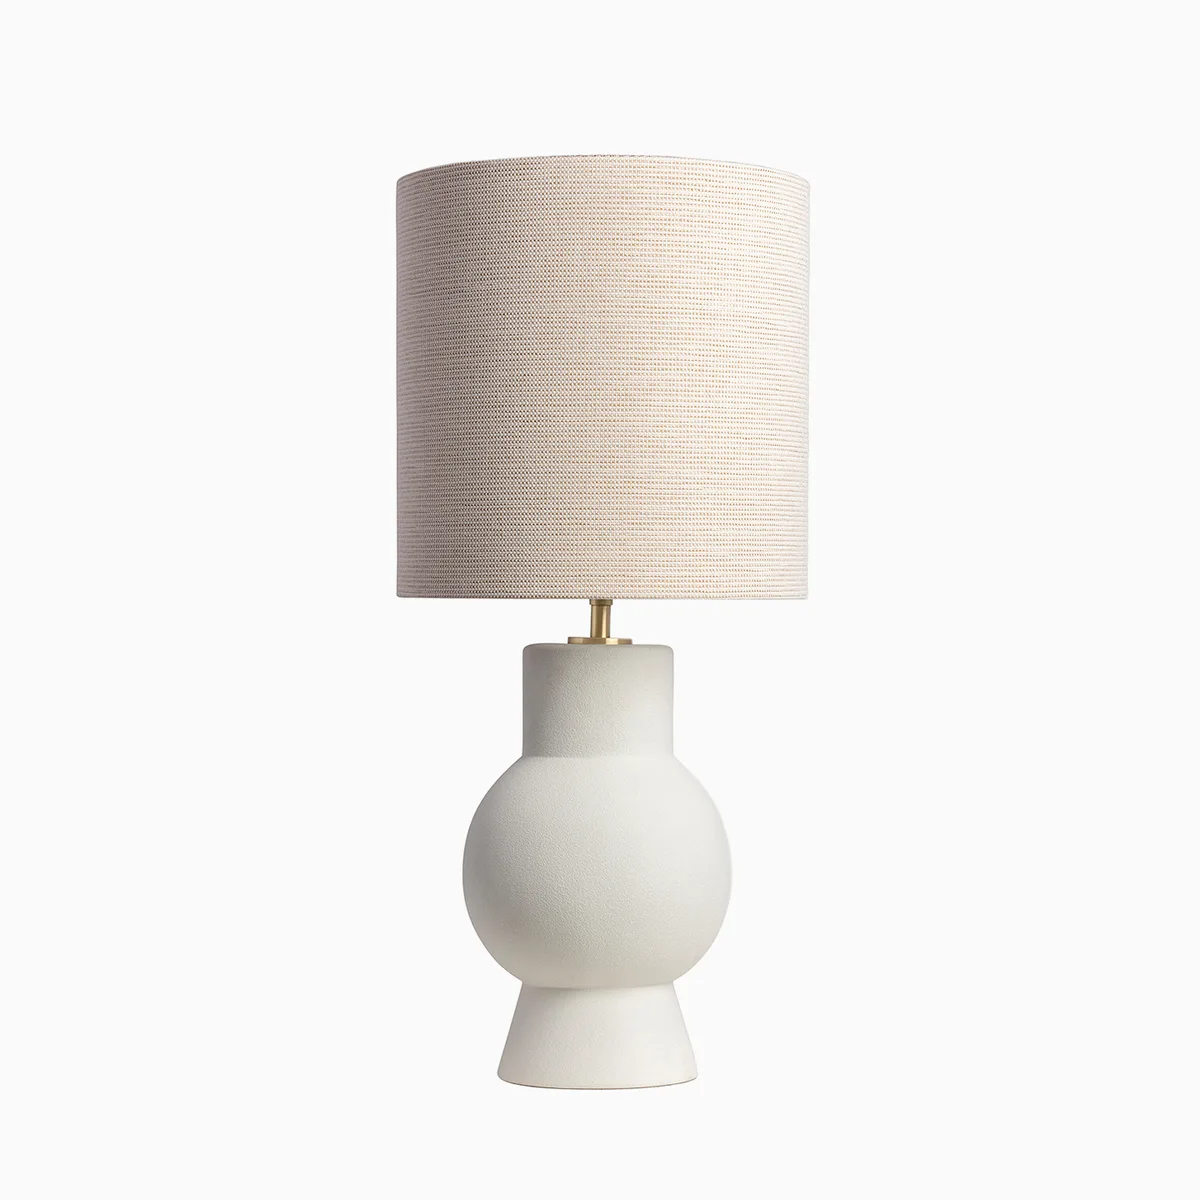 Aster table lamp white